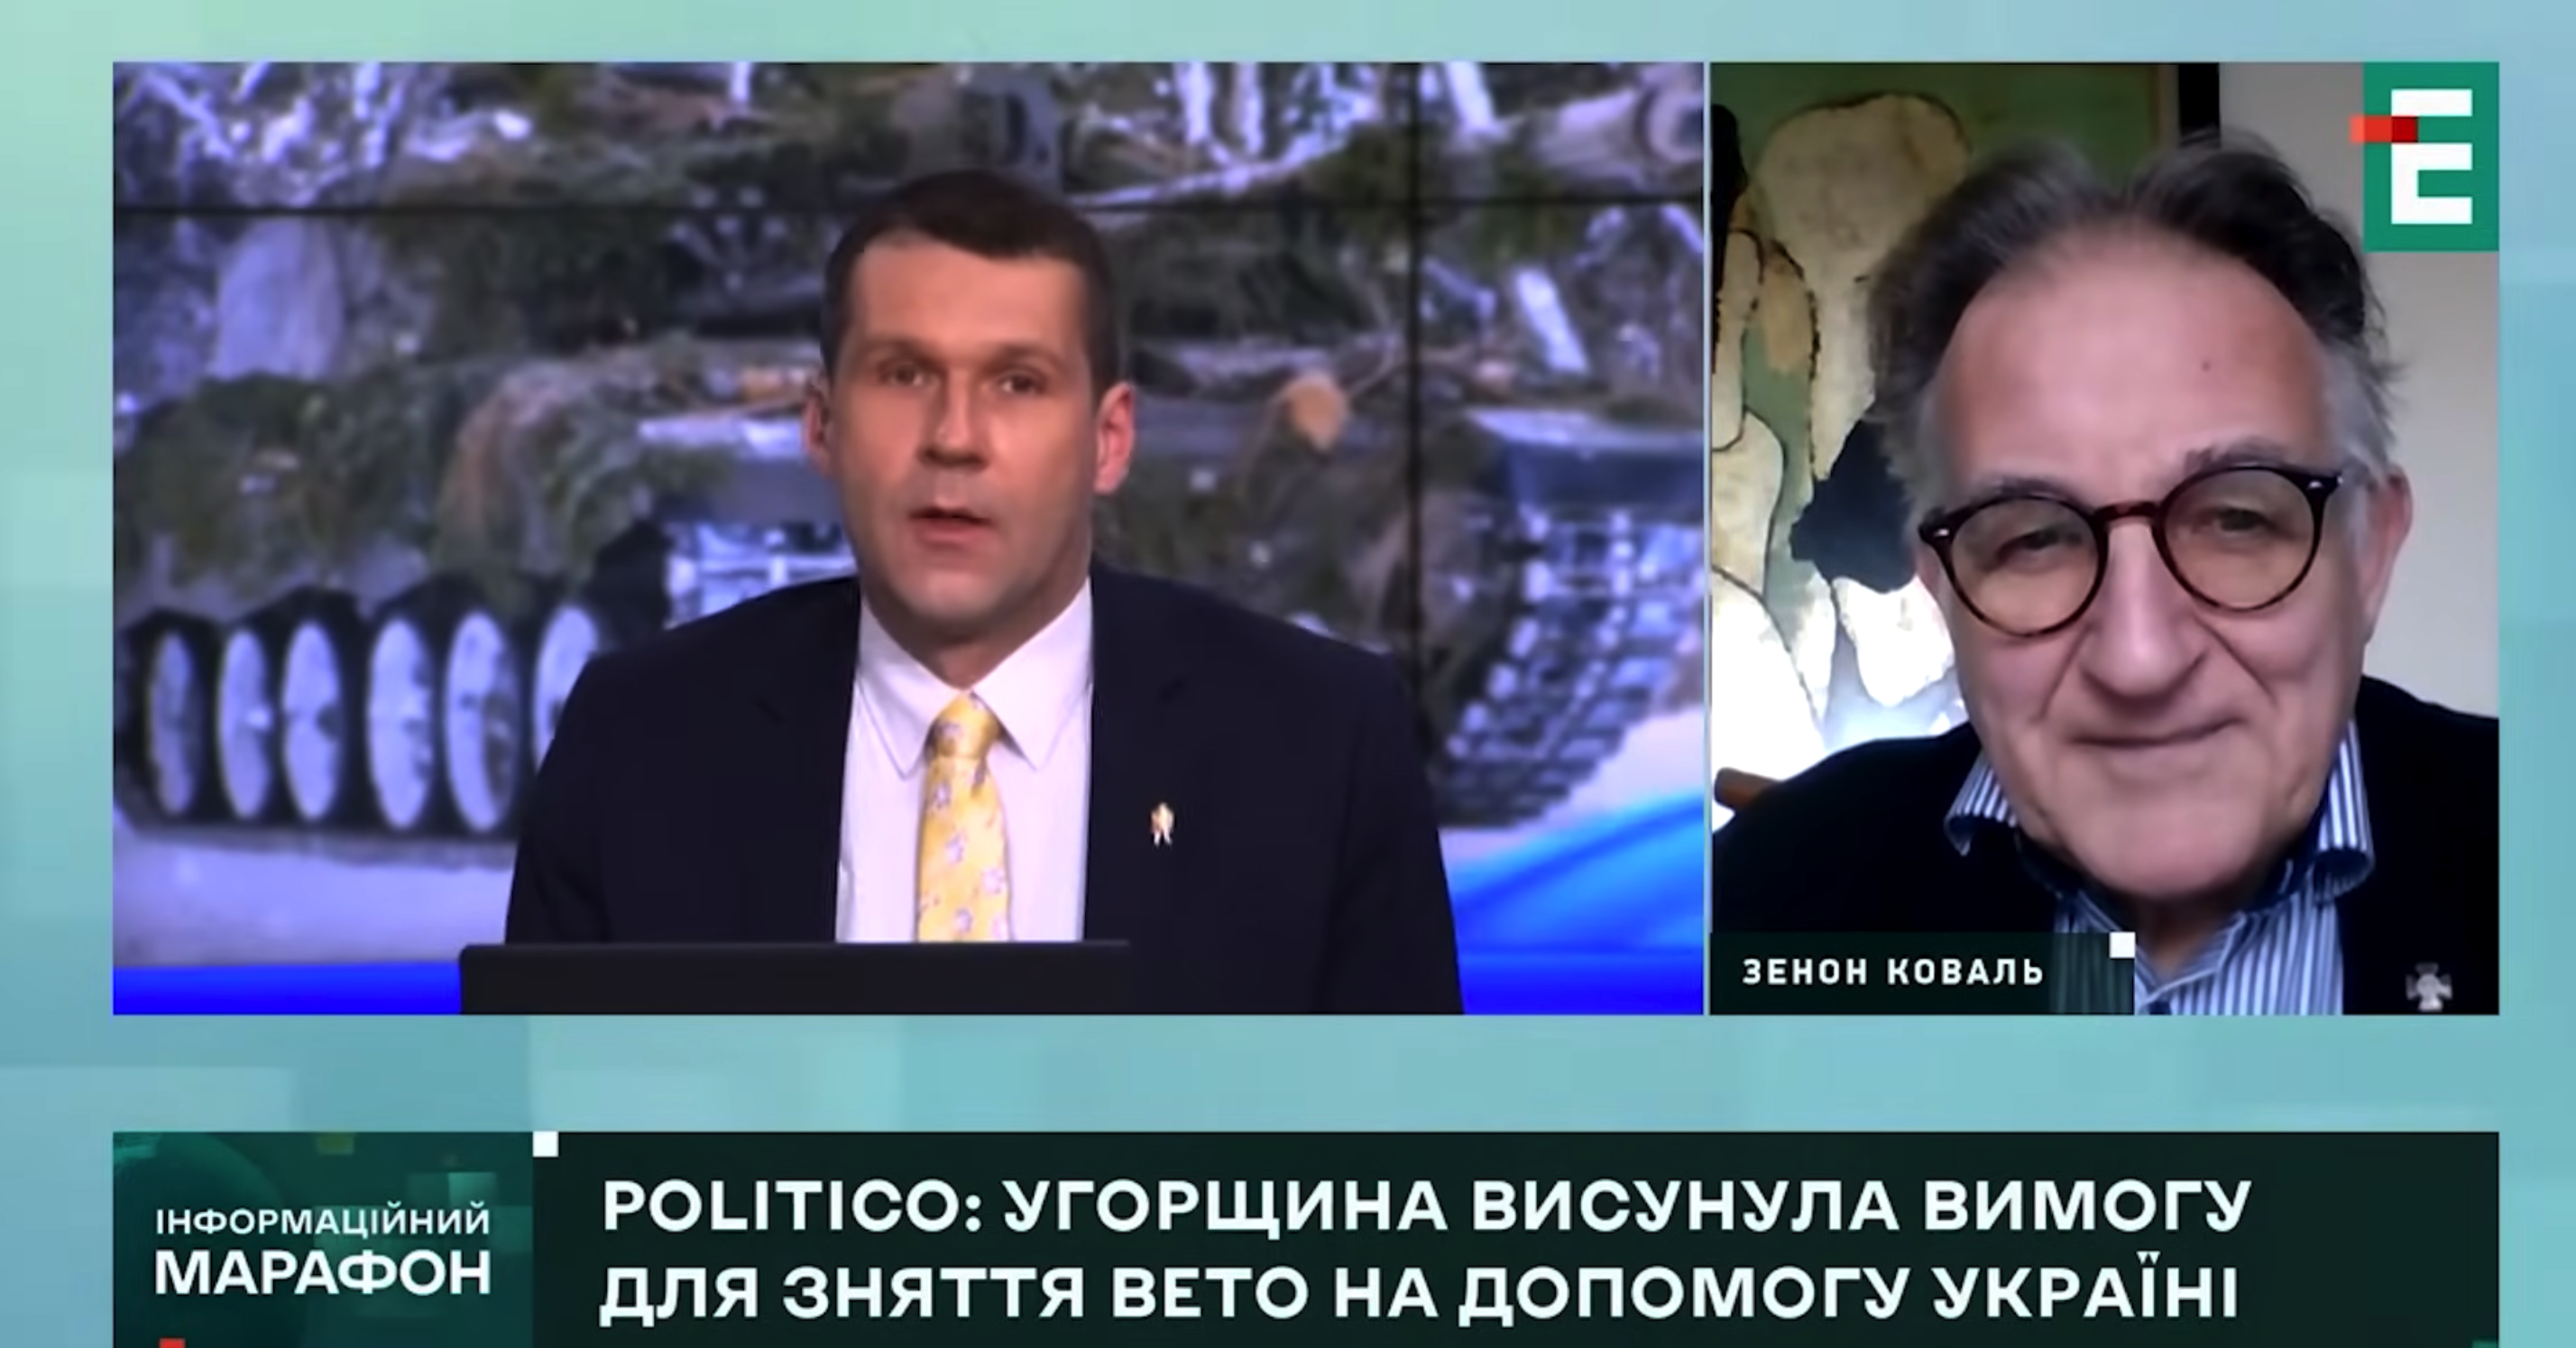 Zenon Kowal on EU support for Ukraine with Orbán’s possible European Council presidency